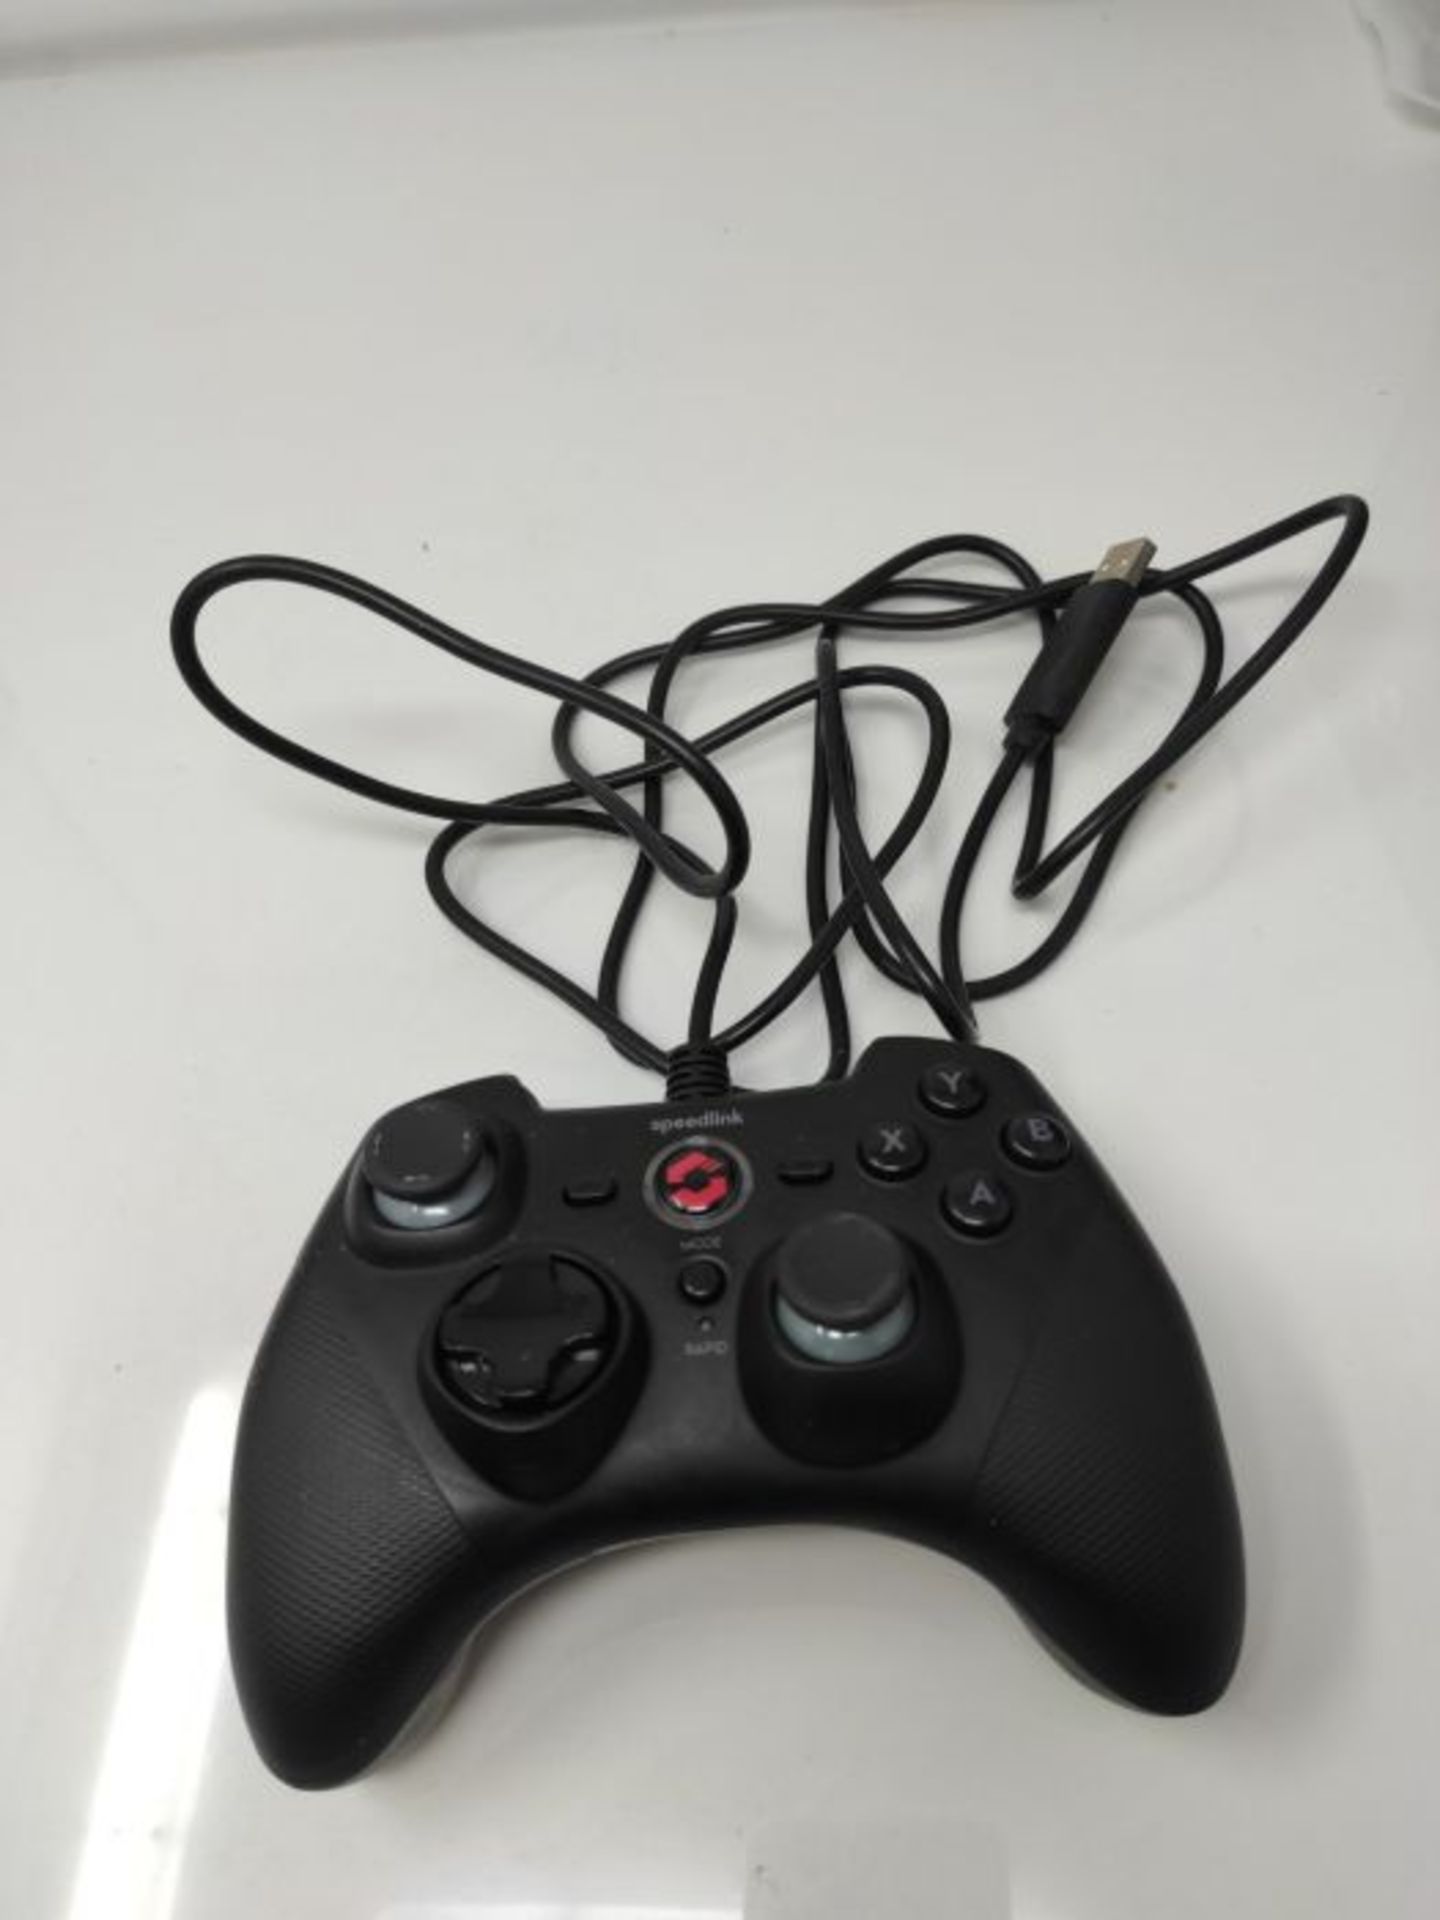 Speedlink RAIT Gamepad - wired gamepad with vibration function, for PC/PS3/Switch, bla - Image 3 of 3